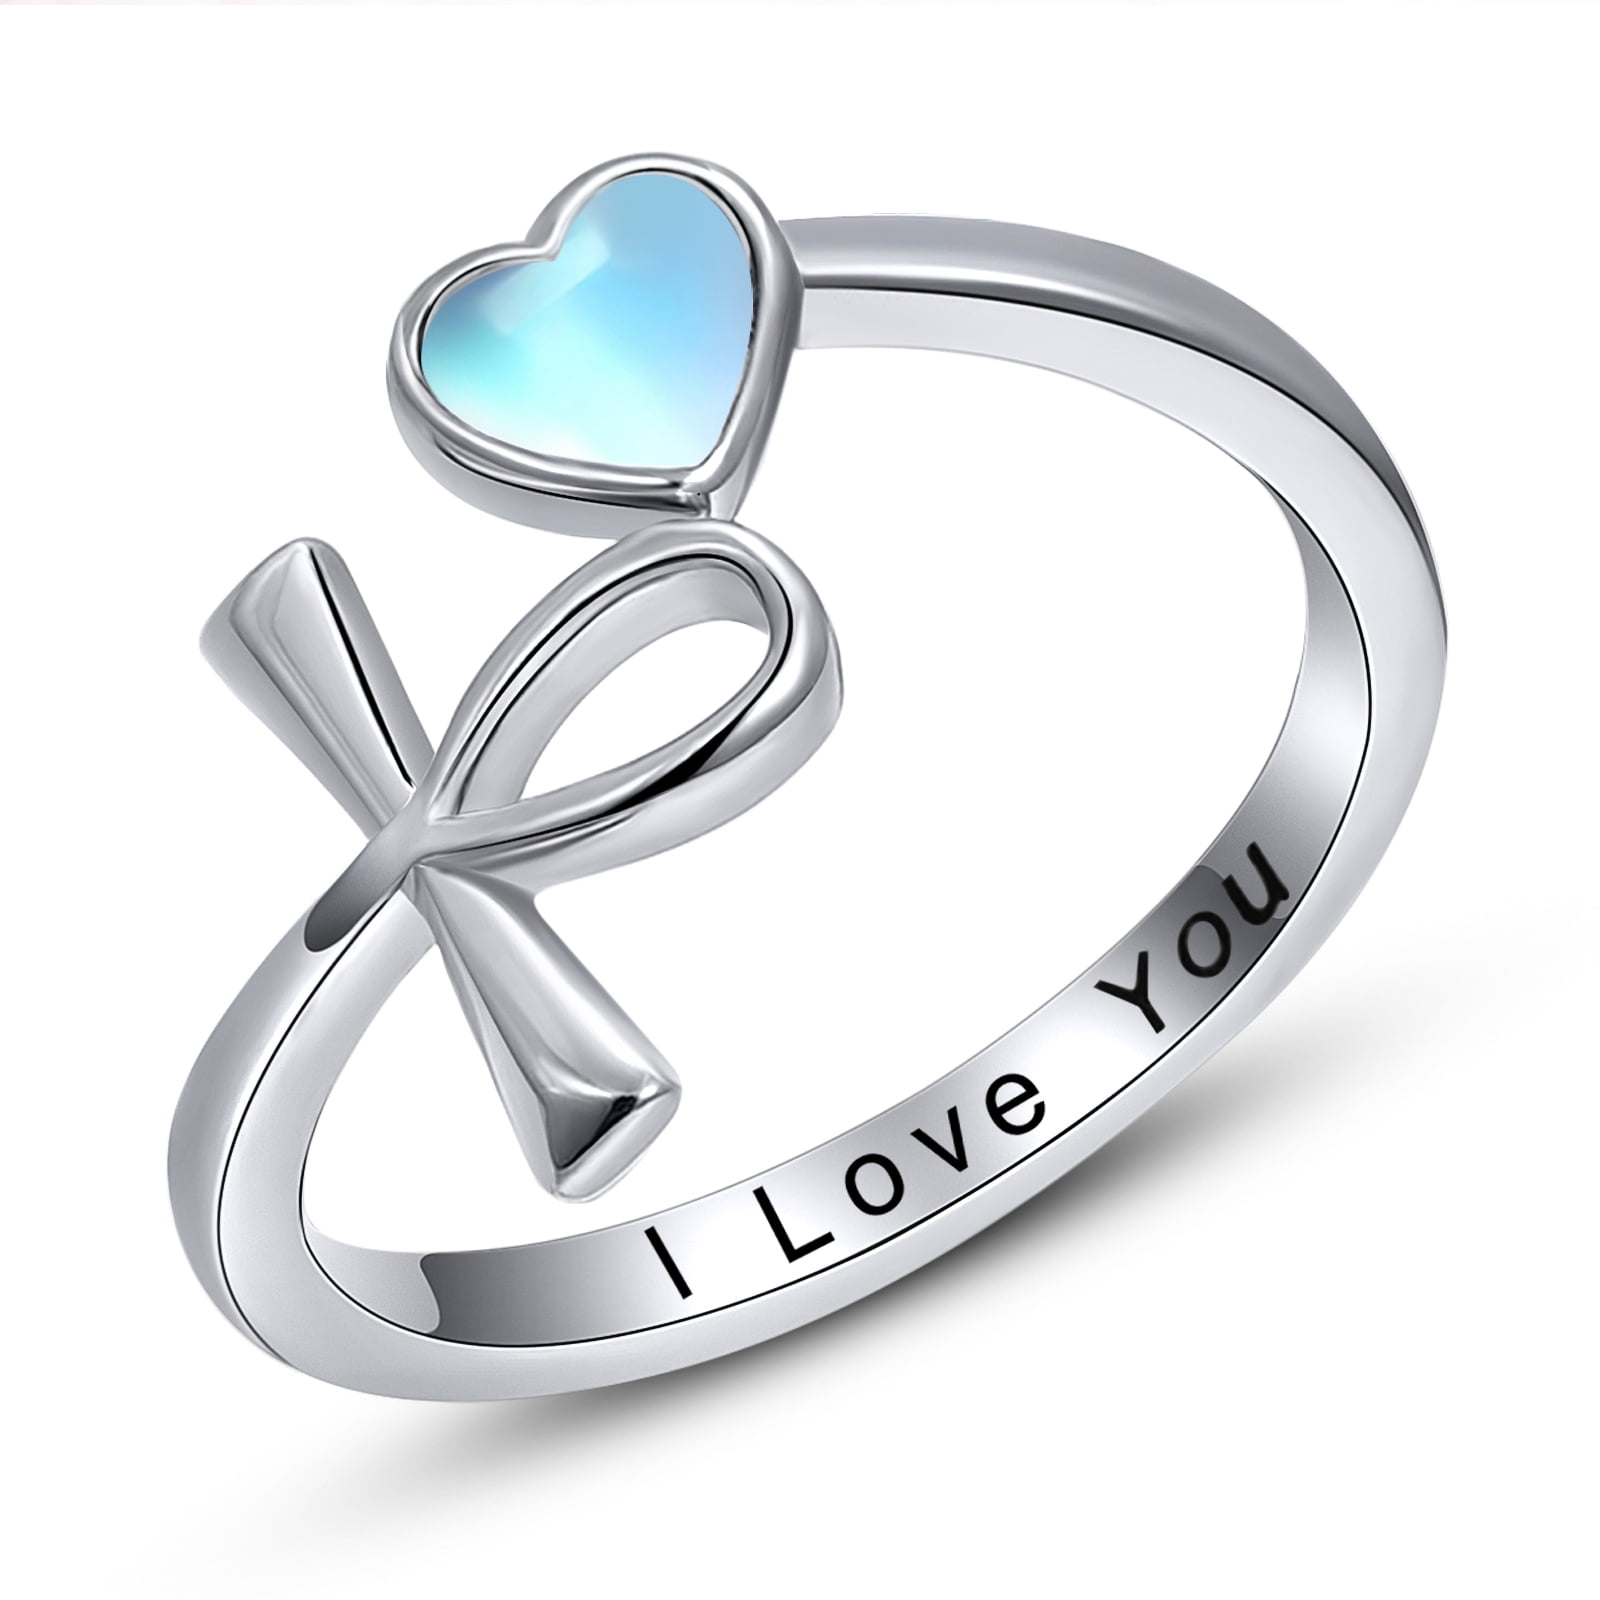 ME & YOU Ring for Valentine's Day Gift | Couple Ring Gift for Valentine's  Day, Birthday,